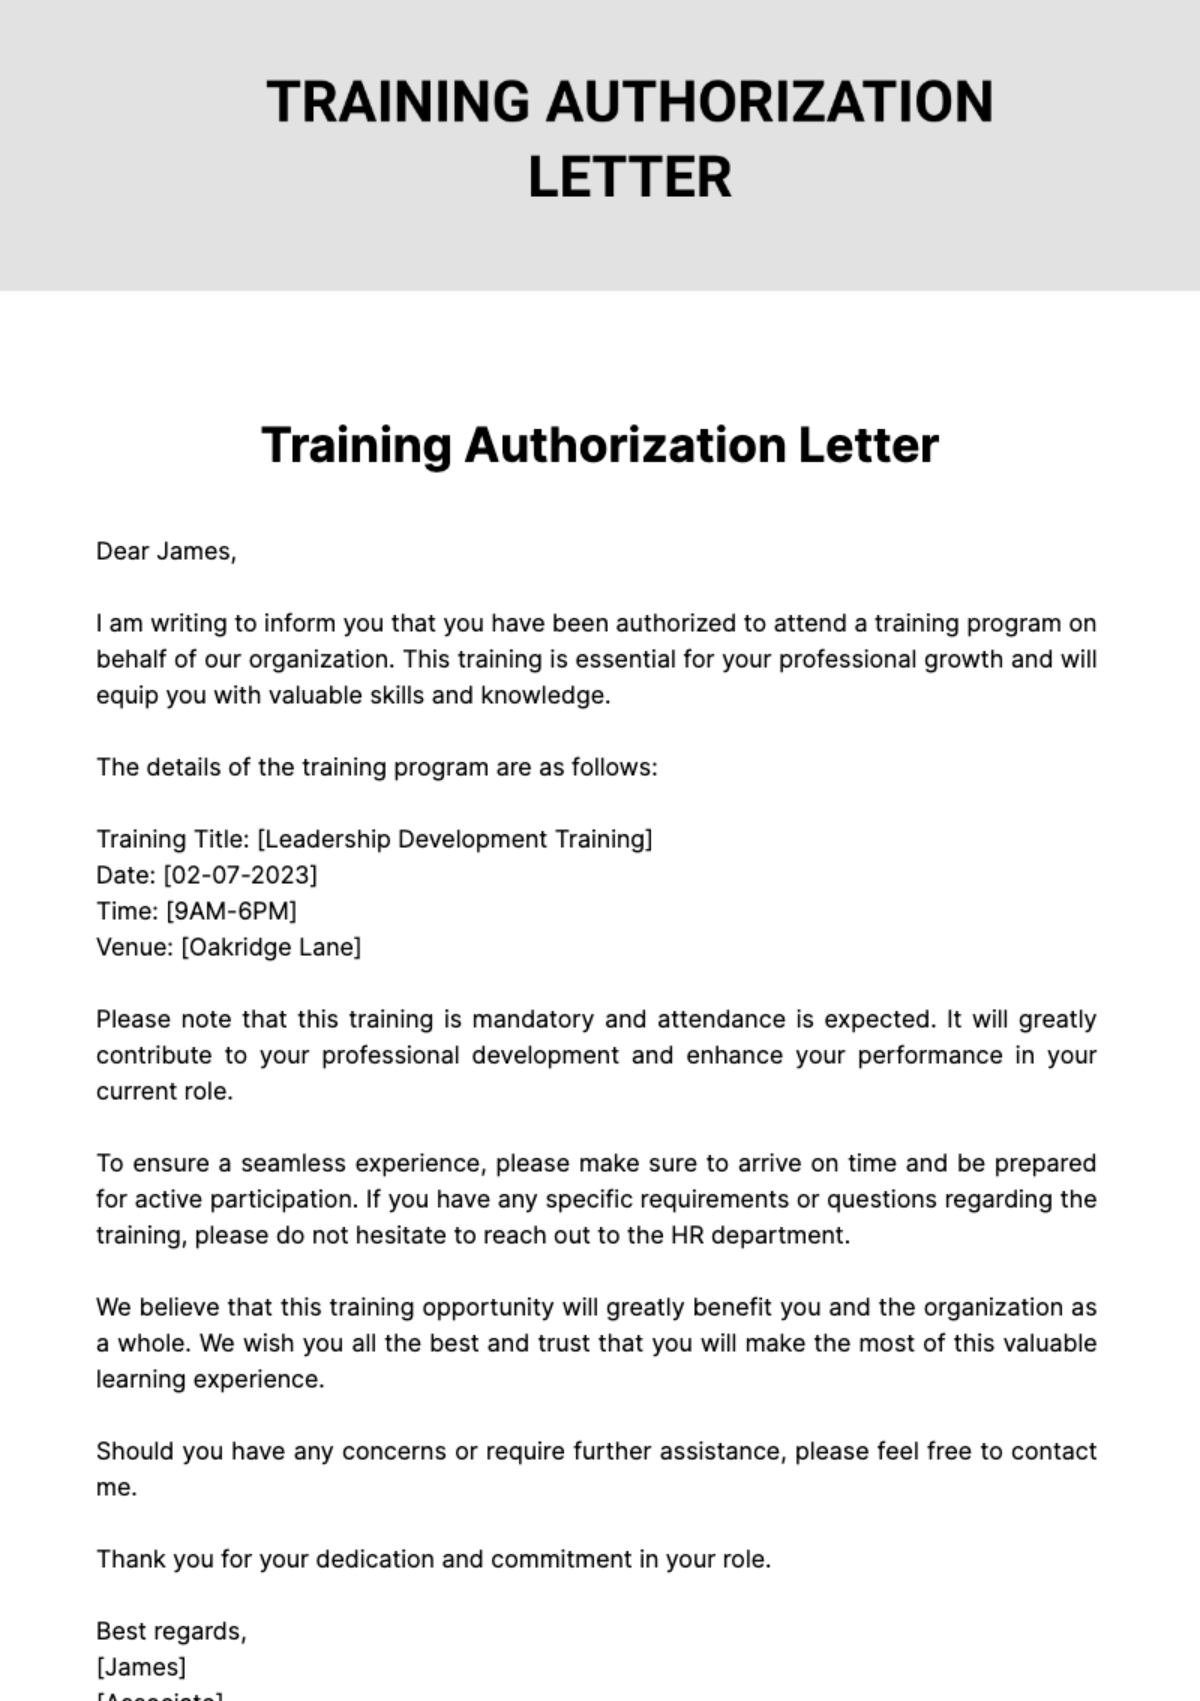 Training Authorization Letter Template